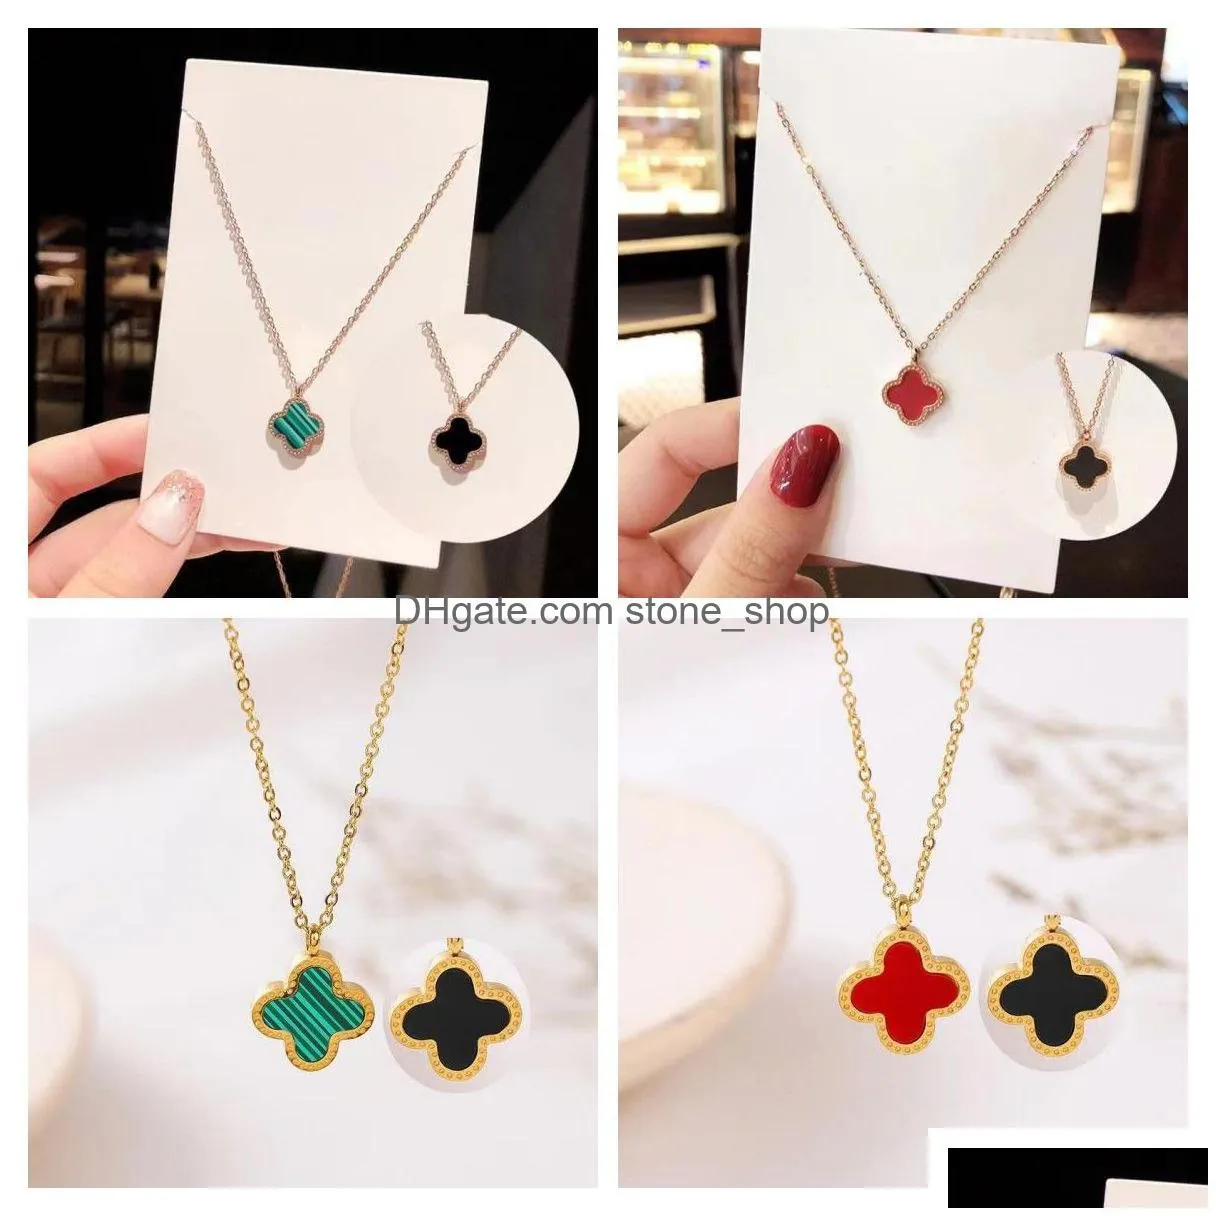  est designer flower necklace 4/four leaf clover with diamonds elegant clover necklaces earrings for woman jewelry gift high quality